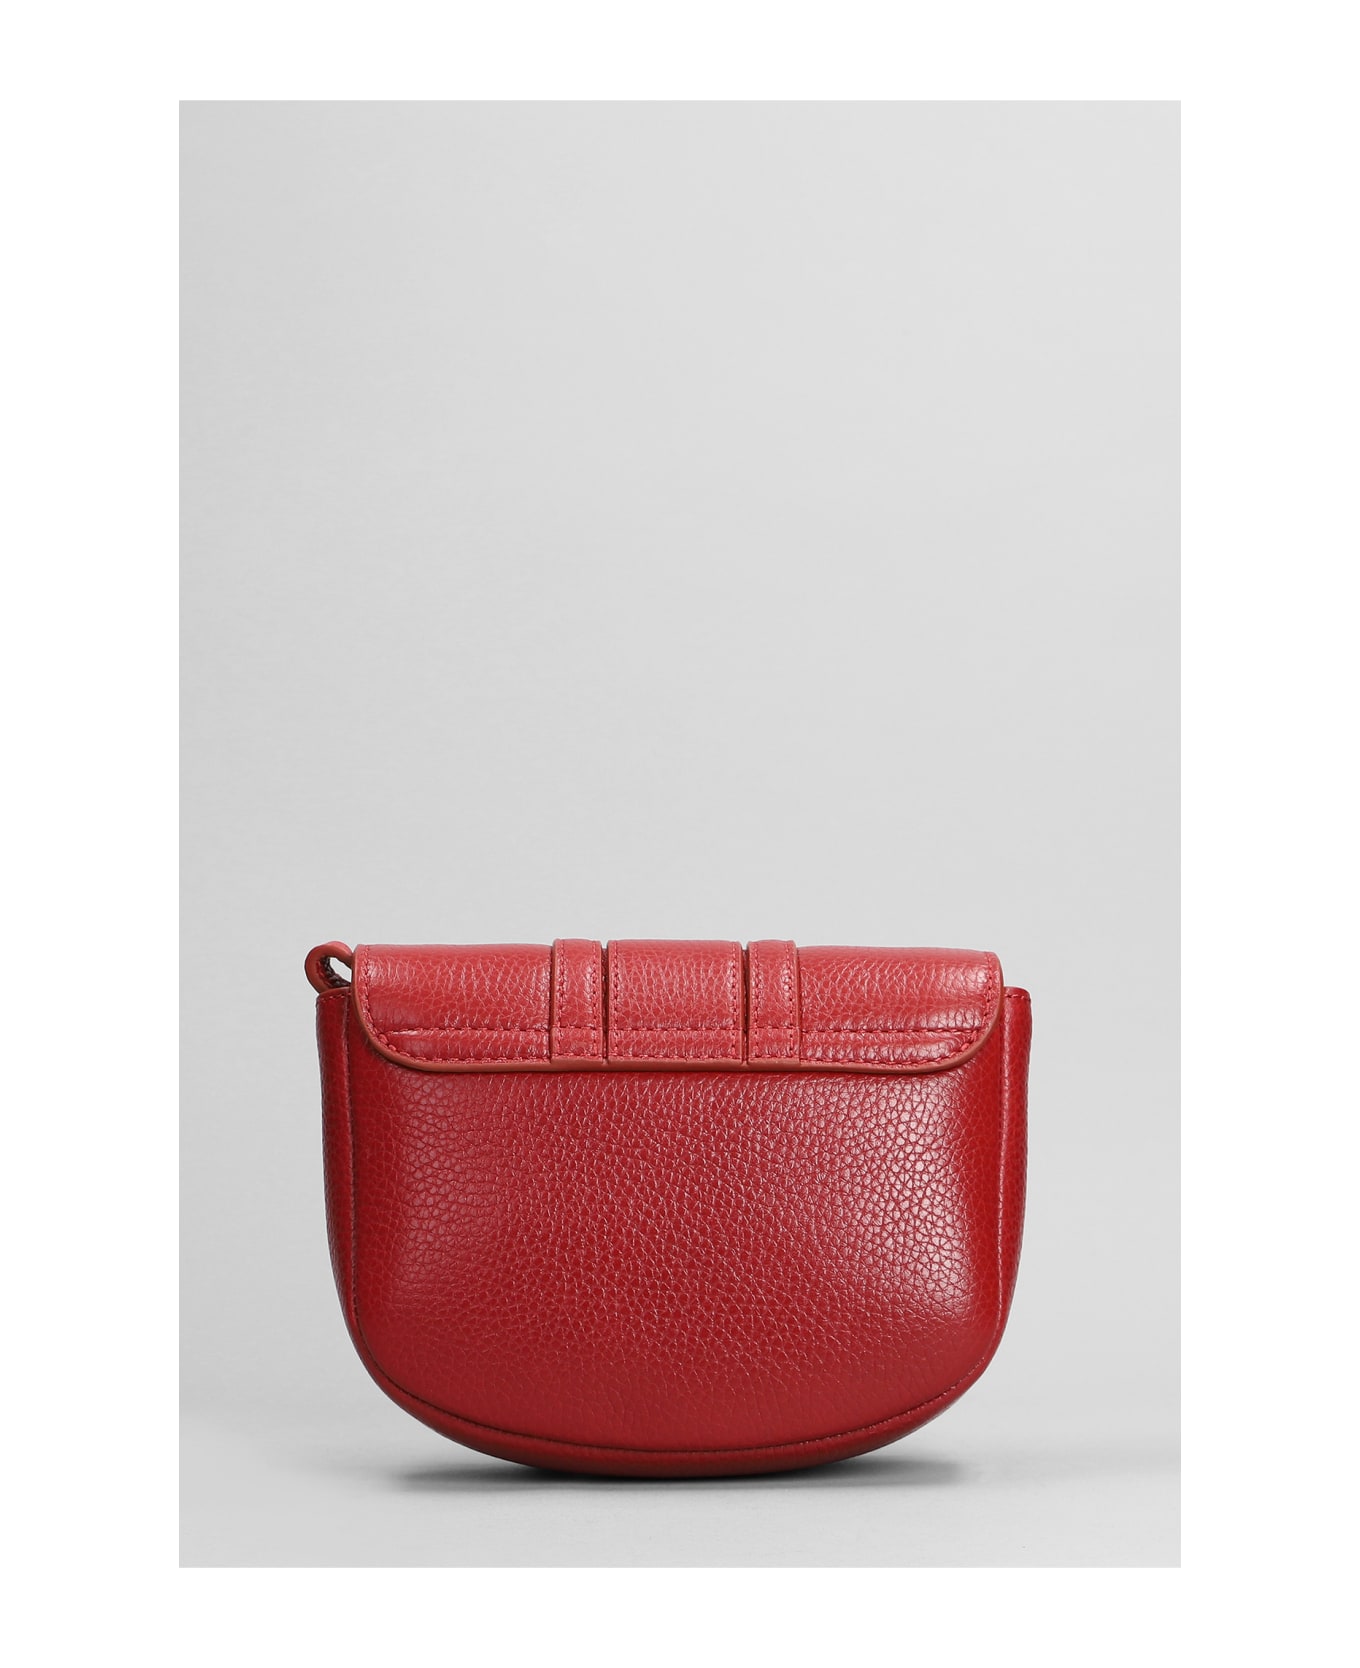 See by Chloé Hana Shoulder Bag In Red Leather - red トートバッグ